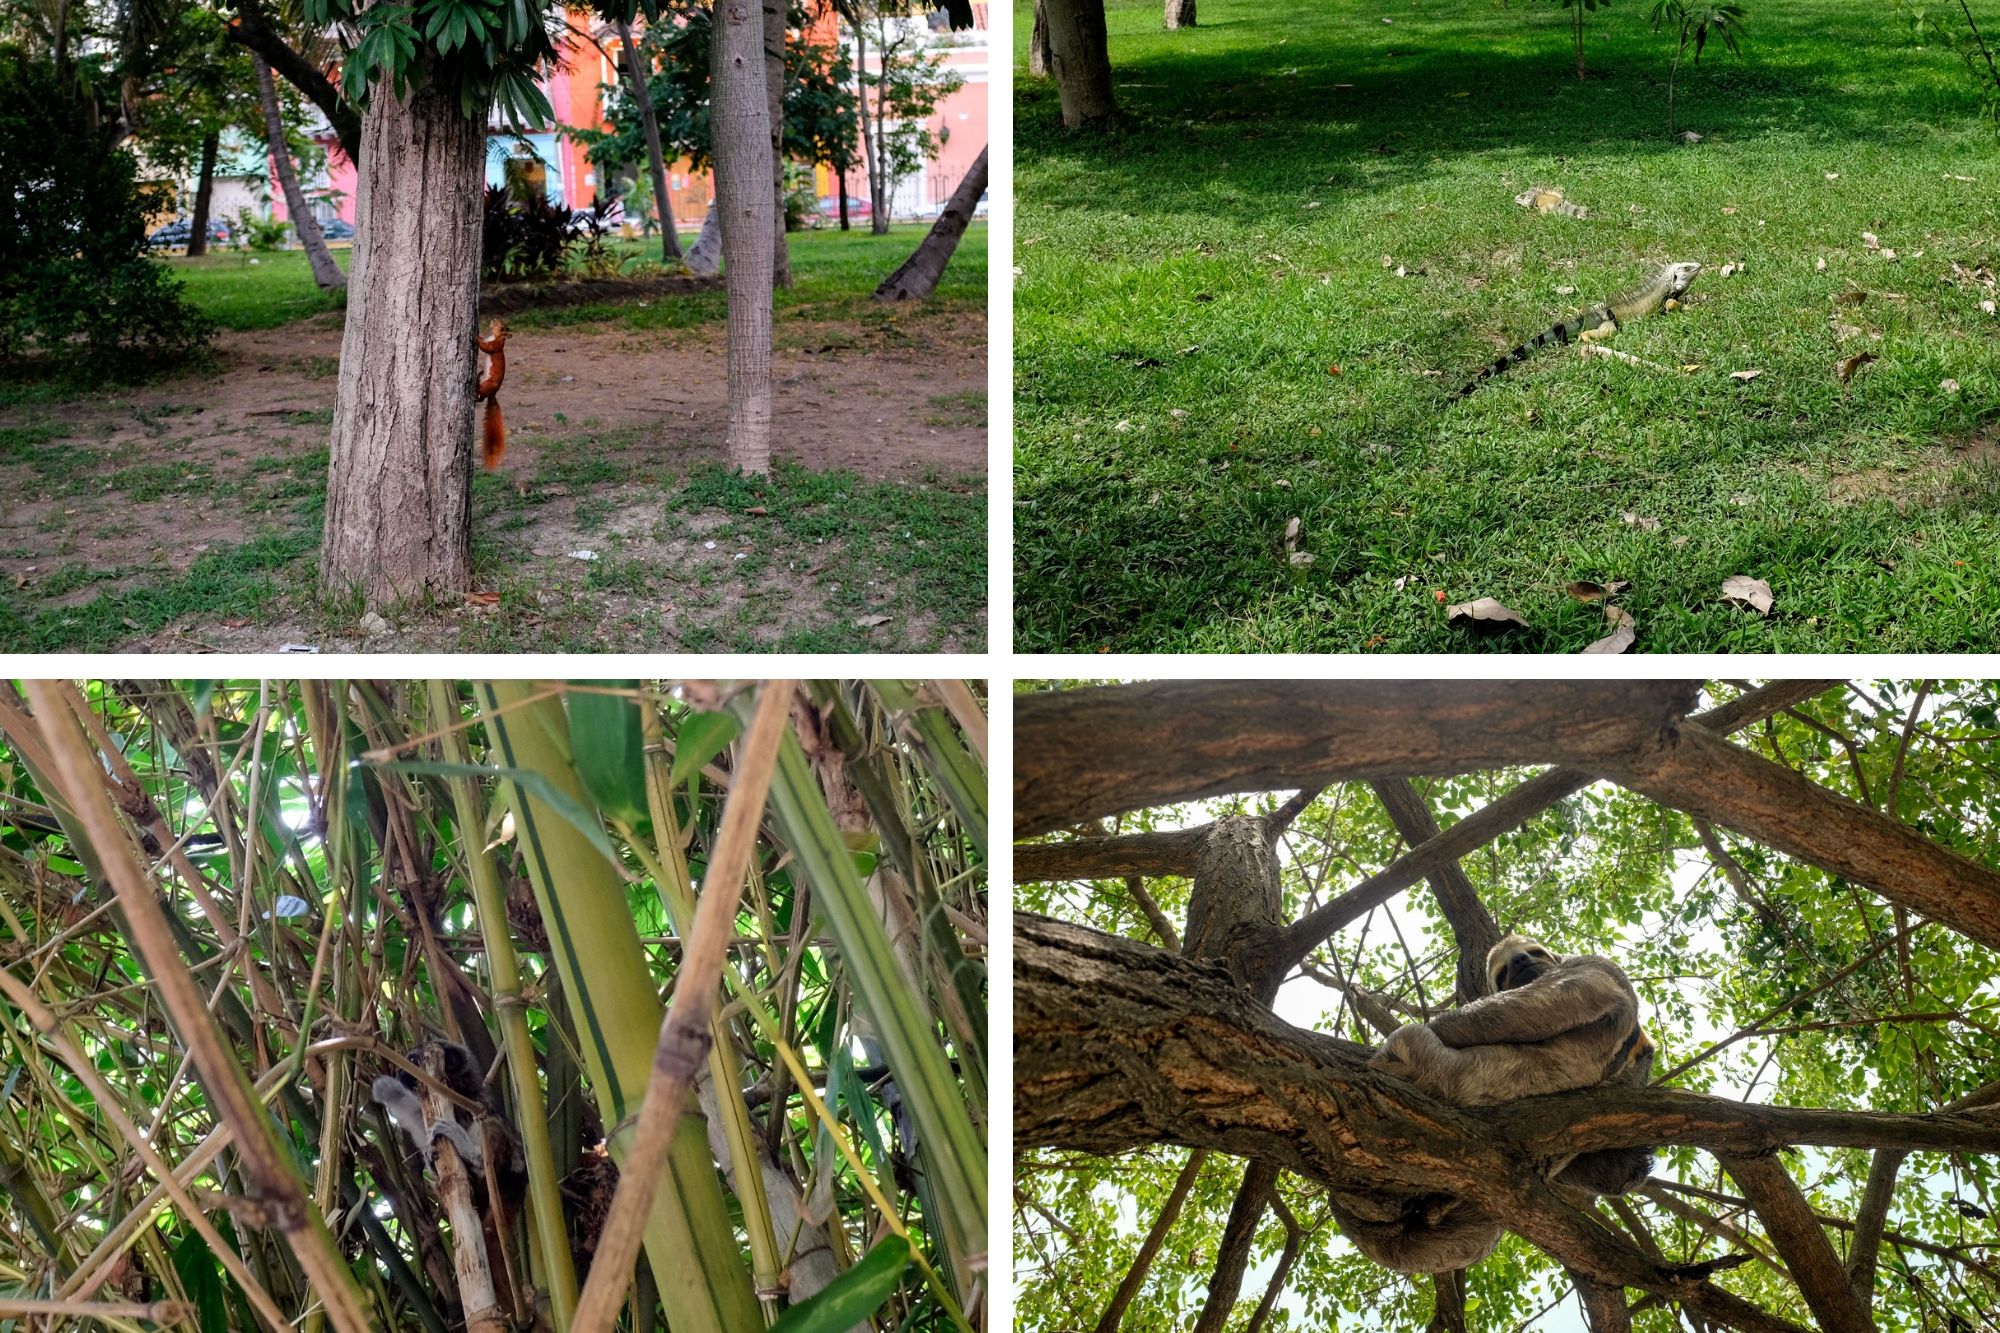 Collage of animals in the park: a red squirrel, an iguana, monkeys, and a sloth